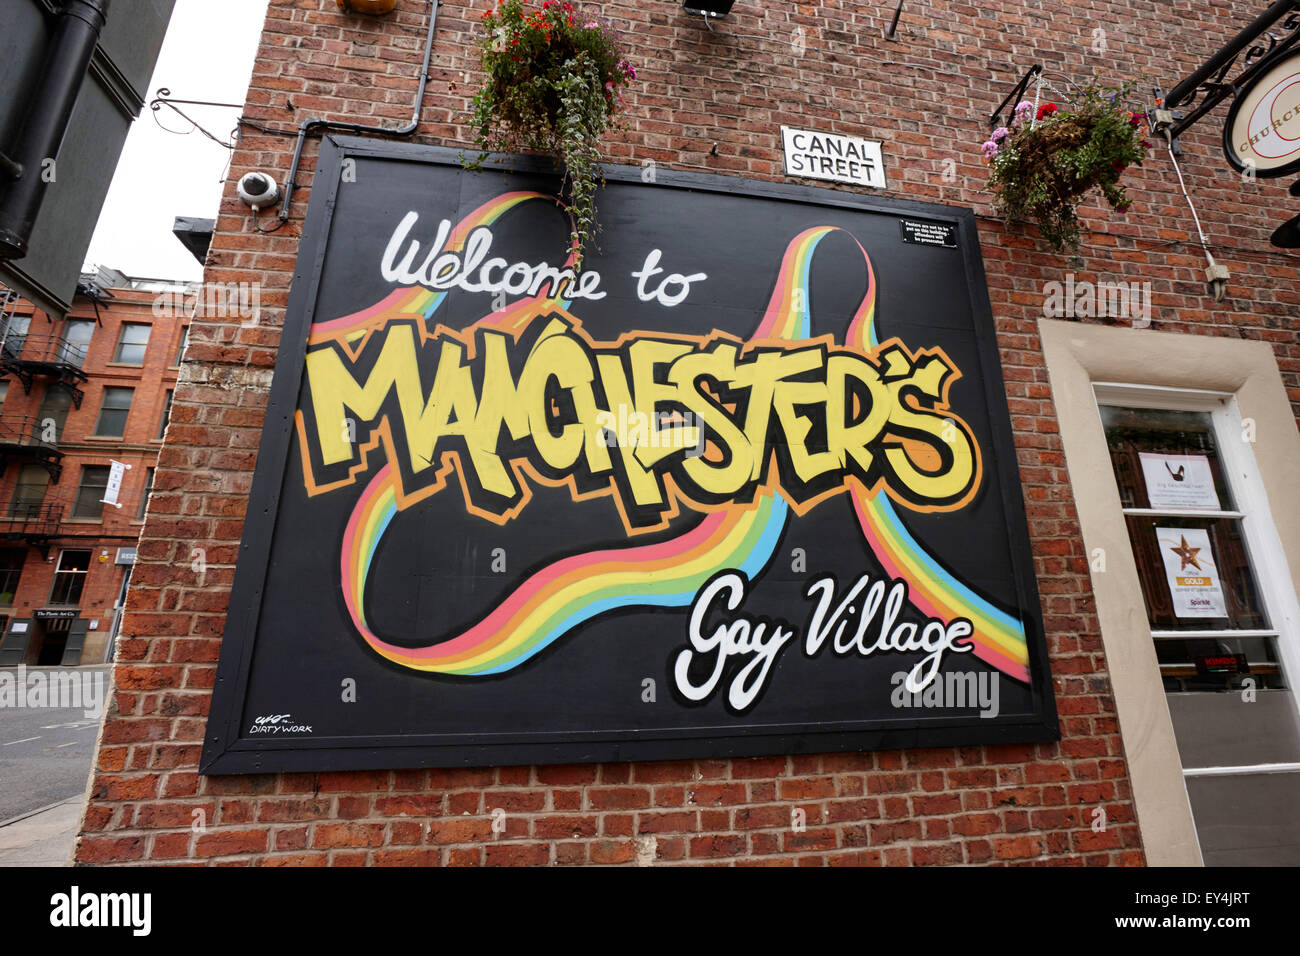 Canal street Manchester gay village England UK Stock Photo